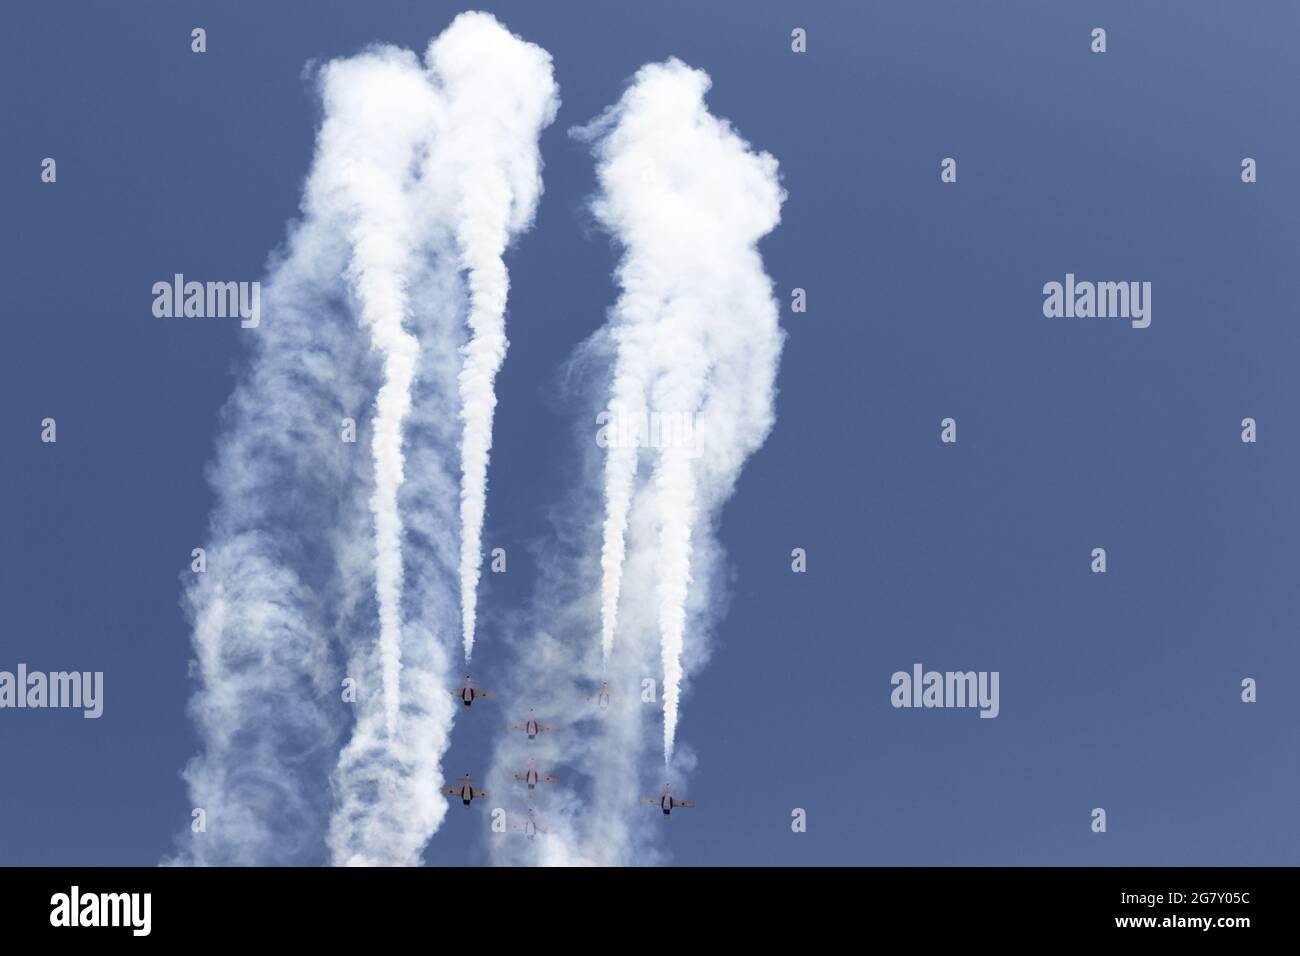 The Royal Canadian Air Force (RCAF) Snowbirds 431 Air Demonstration Squadron practicing their 2021 performance in London, Ontario, Canada. Stock Photo